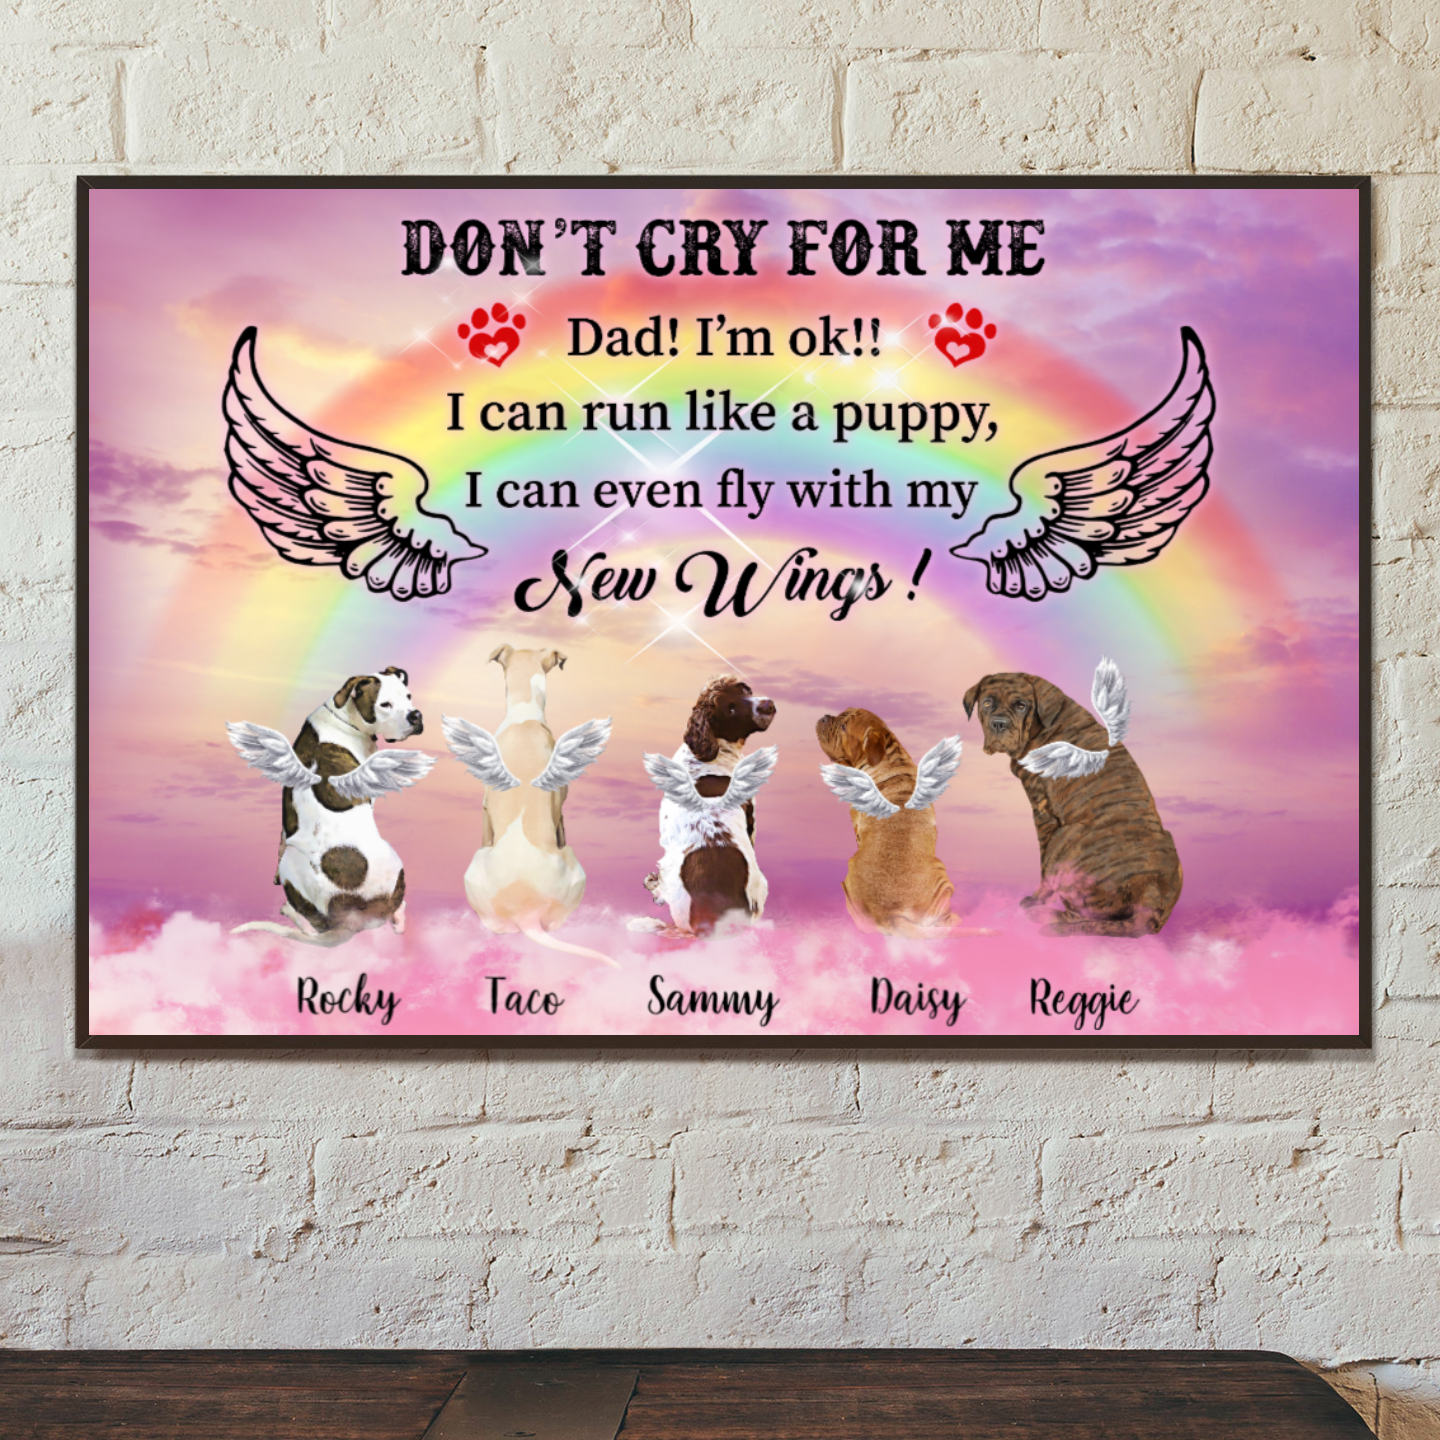 Ciaocustom Poster/Framed Canvas/Unframed Canvas, Custom Dog Breeds/Name/Background/Text, Gifts For Dog Lovers, Dogs With Rainbow Bridge